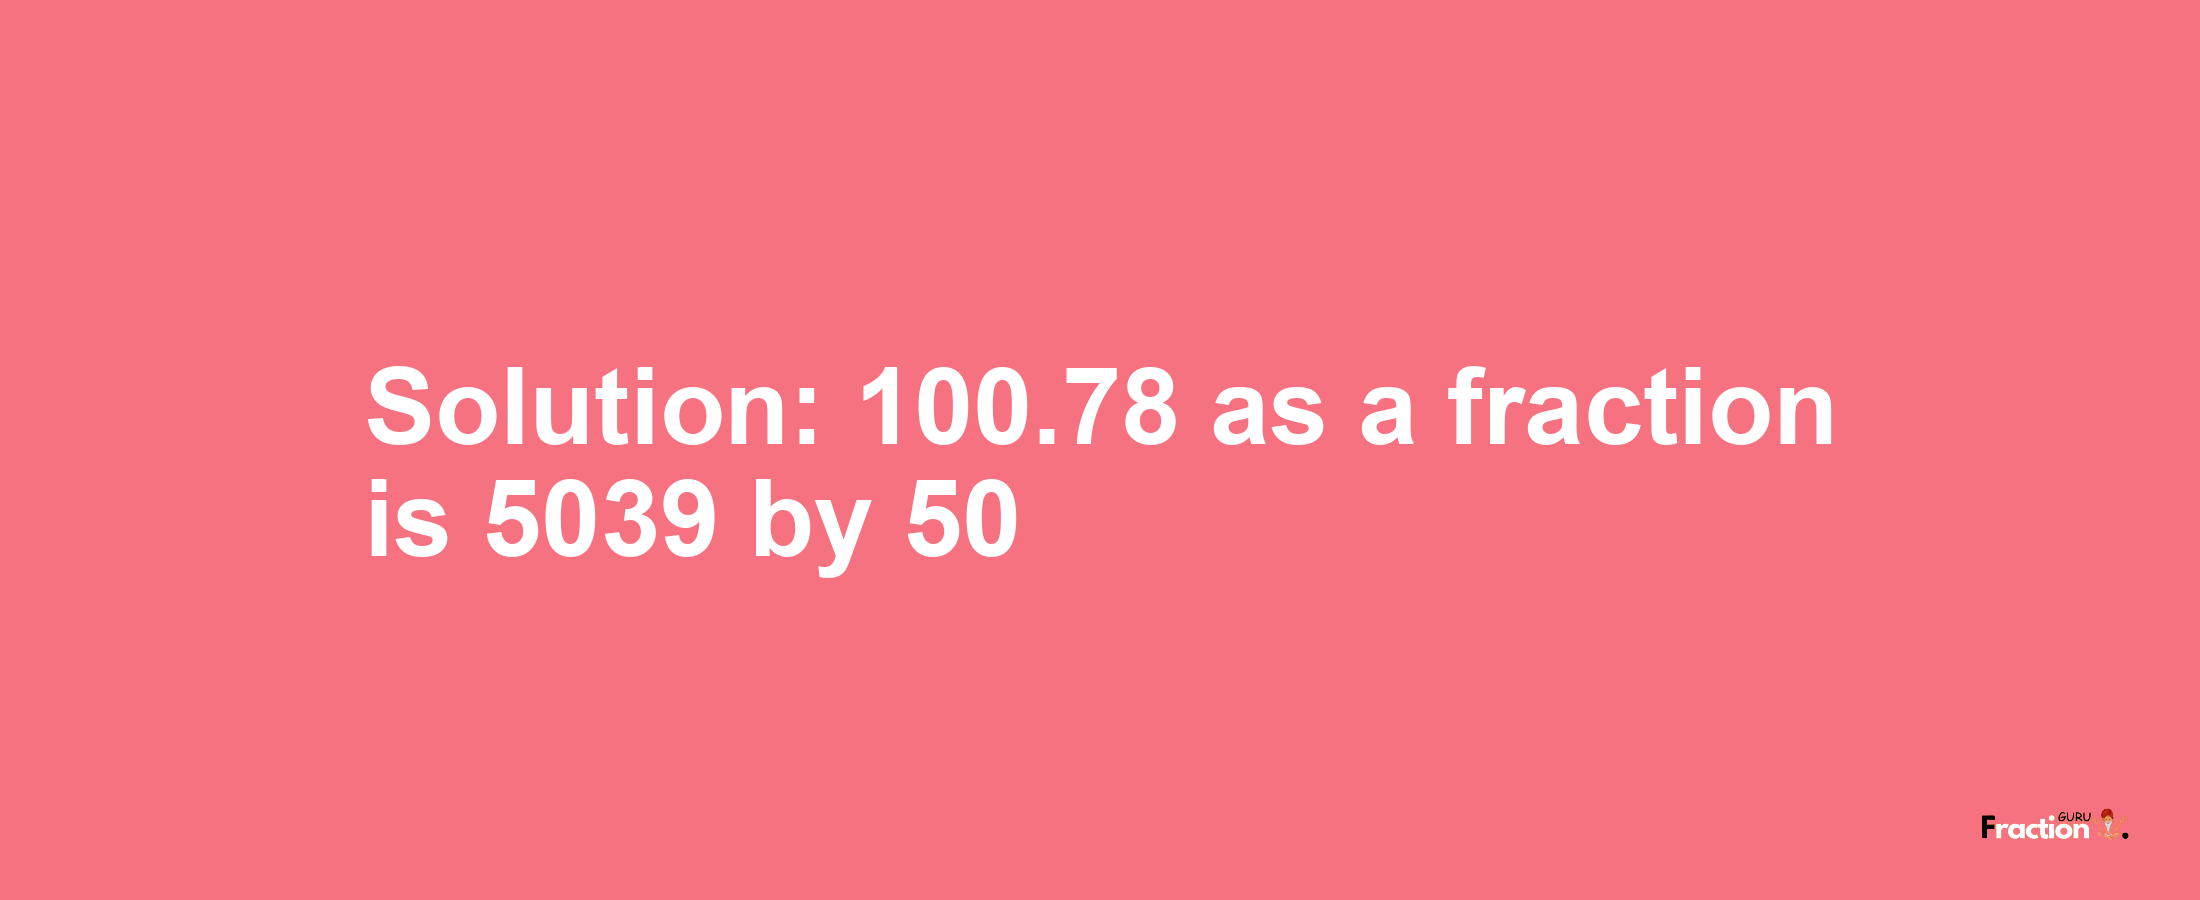 Solution:100.78 as a fraction is 5039/50